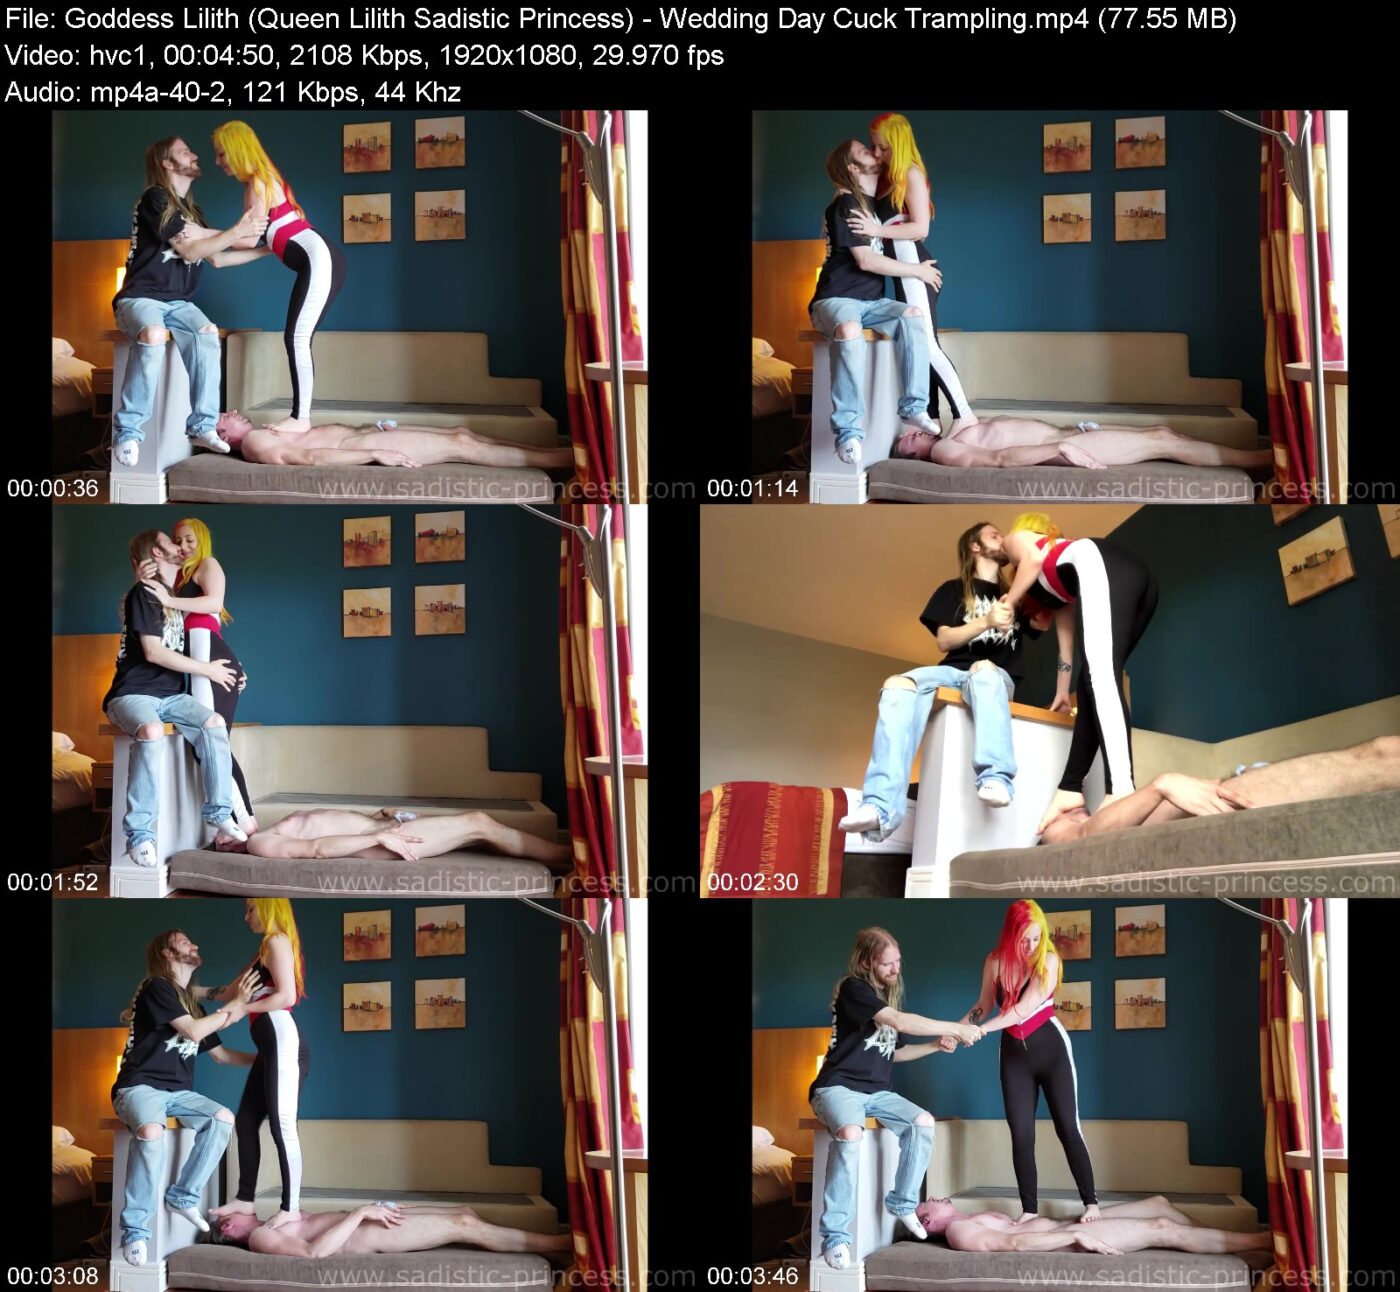 Actress: Goddess Lilith (Queen Lilith Sadistic Princess). Title and Studio: Wedding Day Cuck Trampling